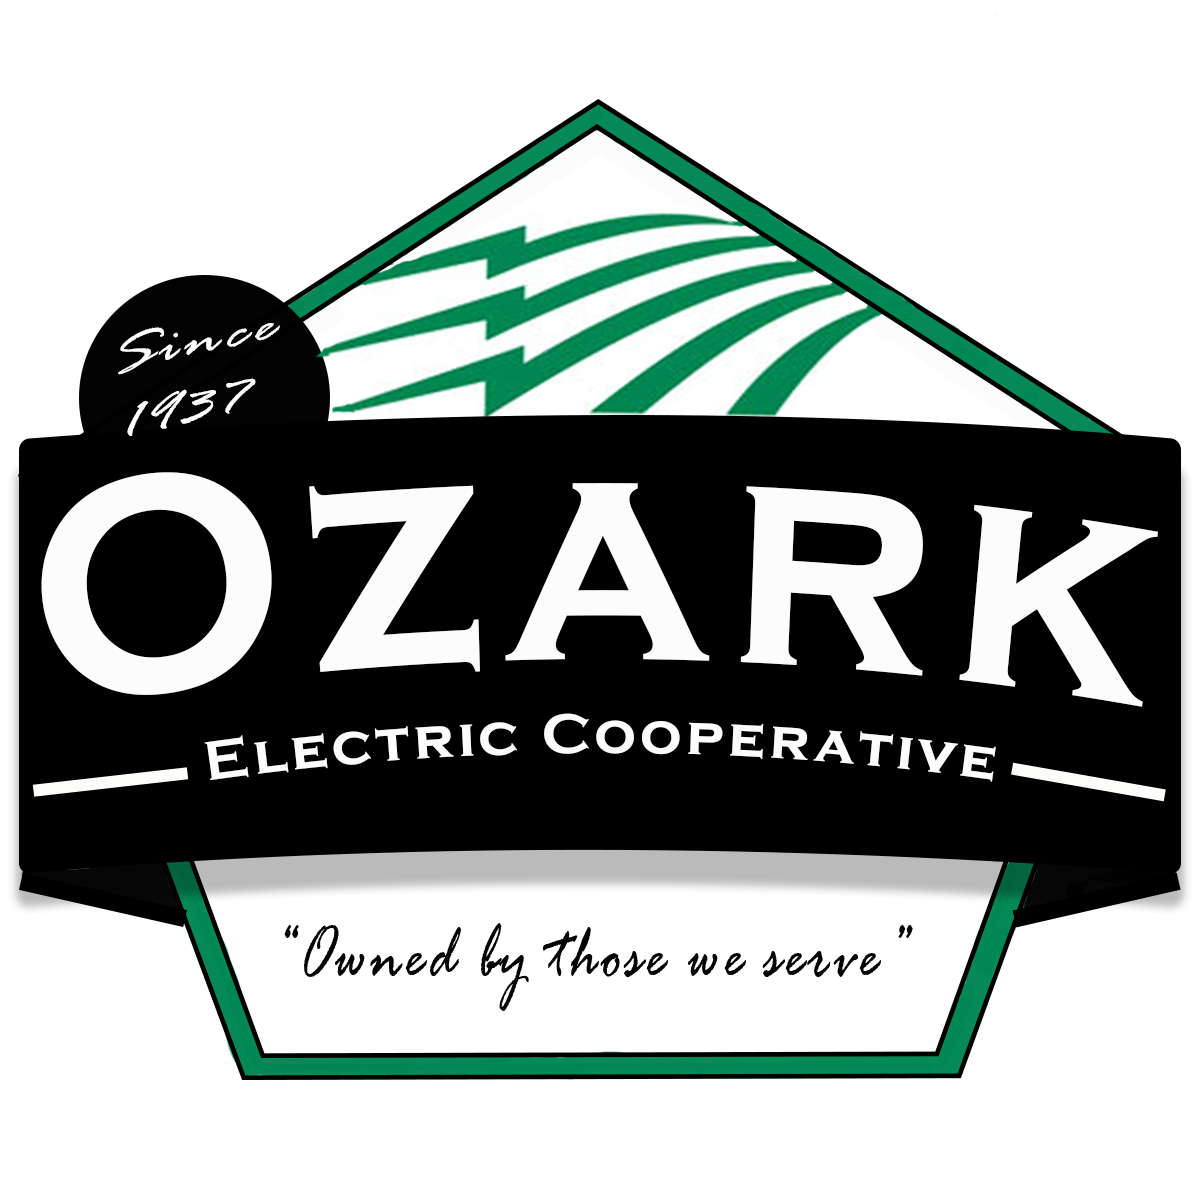 ozark-electric-coop-asks-for-customers-to-conserve-energy-98-1fm